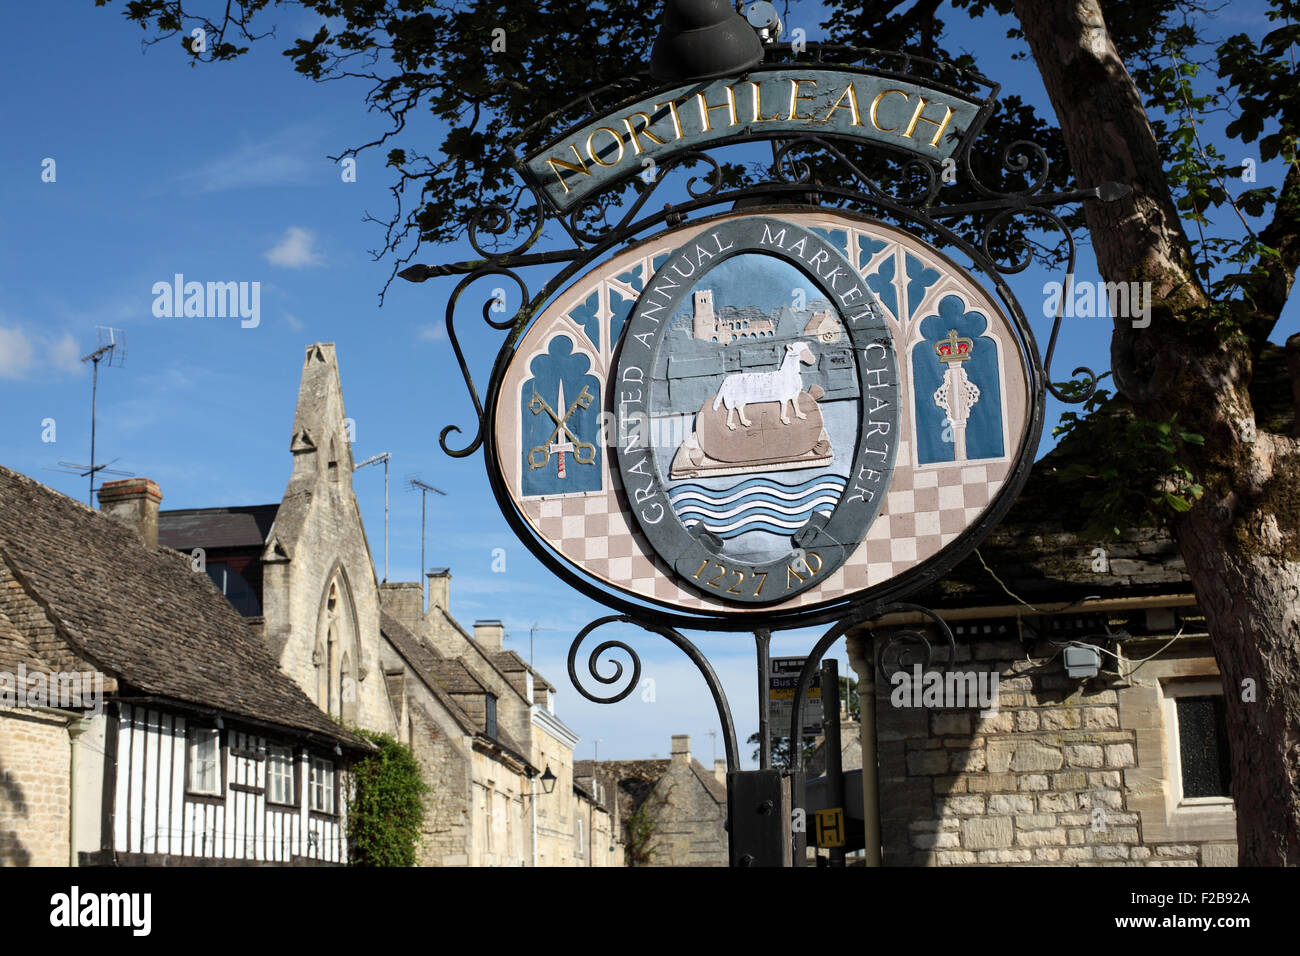 Sign in the town centre of Northleach commemorating the granting of its market charter in 1227. Stock Photo